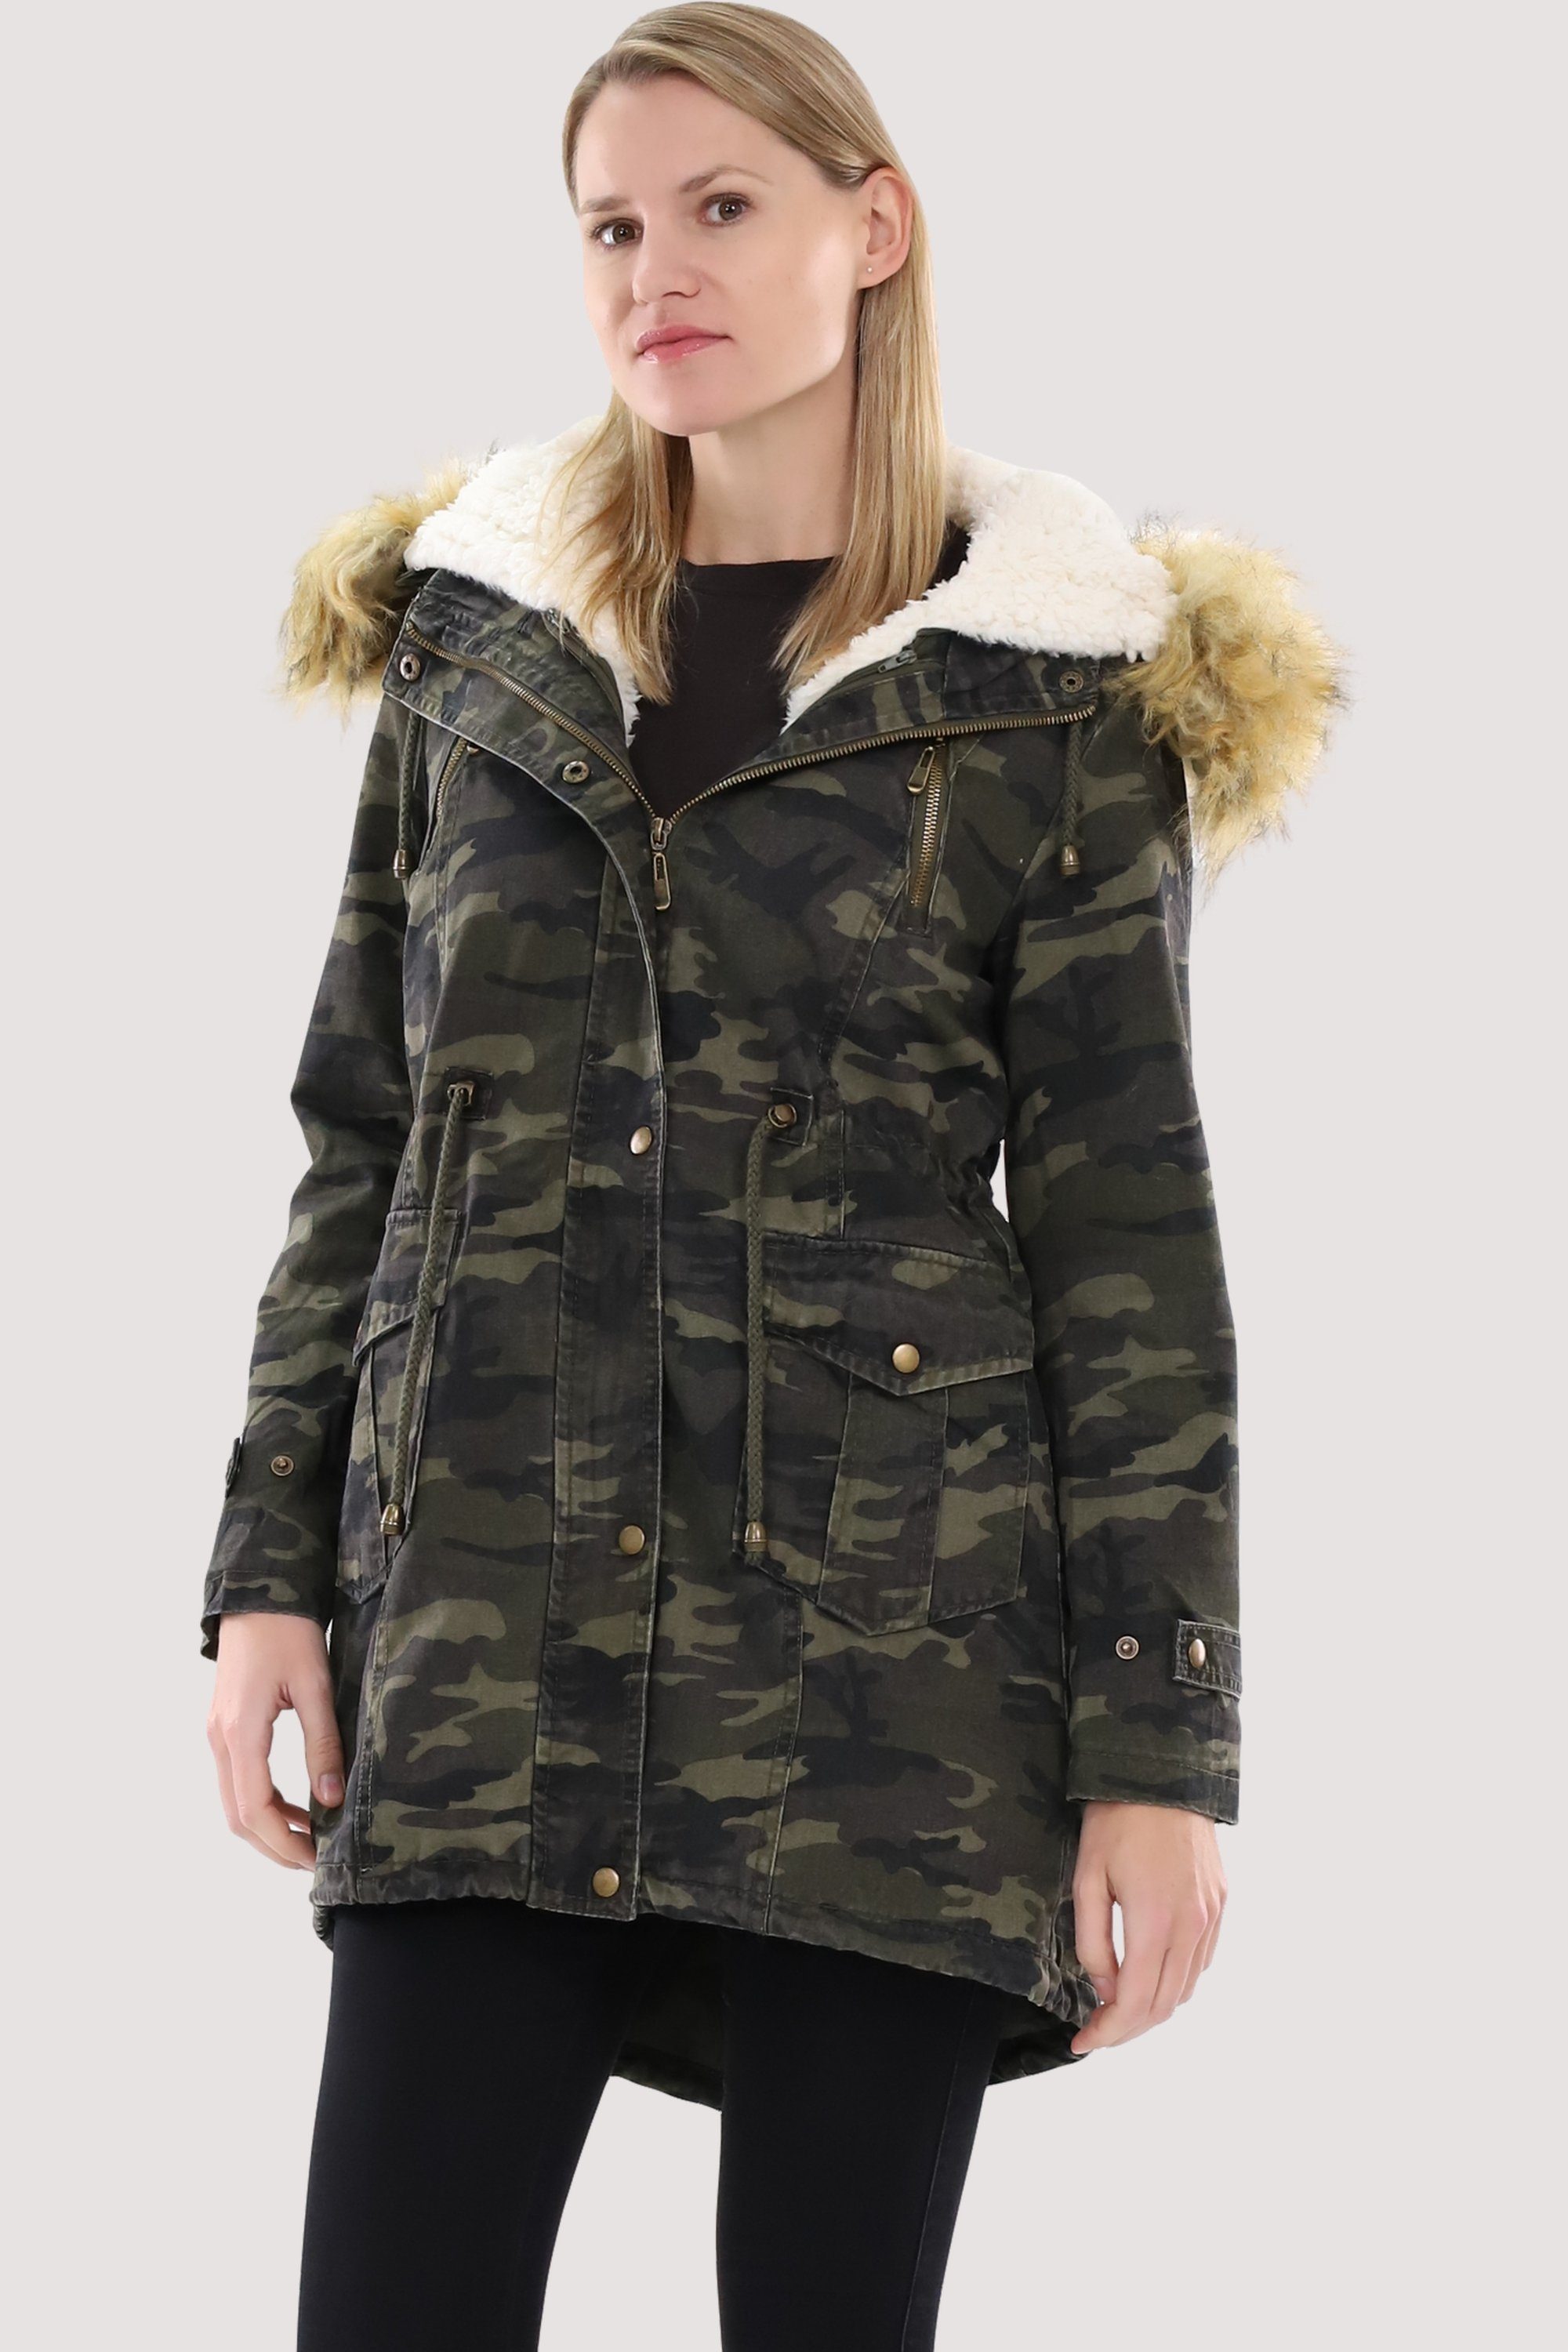 malito more than fashion Parka 81109 Winterjacke in Camouflage Military-Look mit Teddyfell military-81108